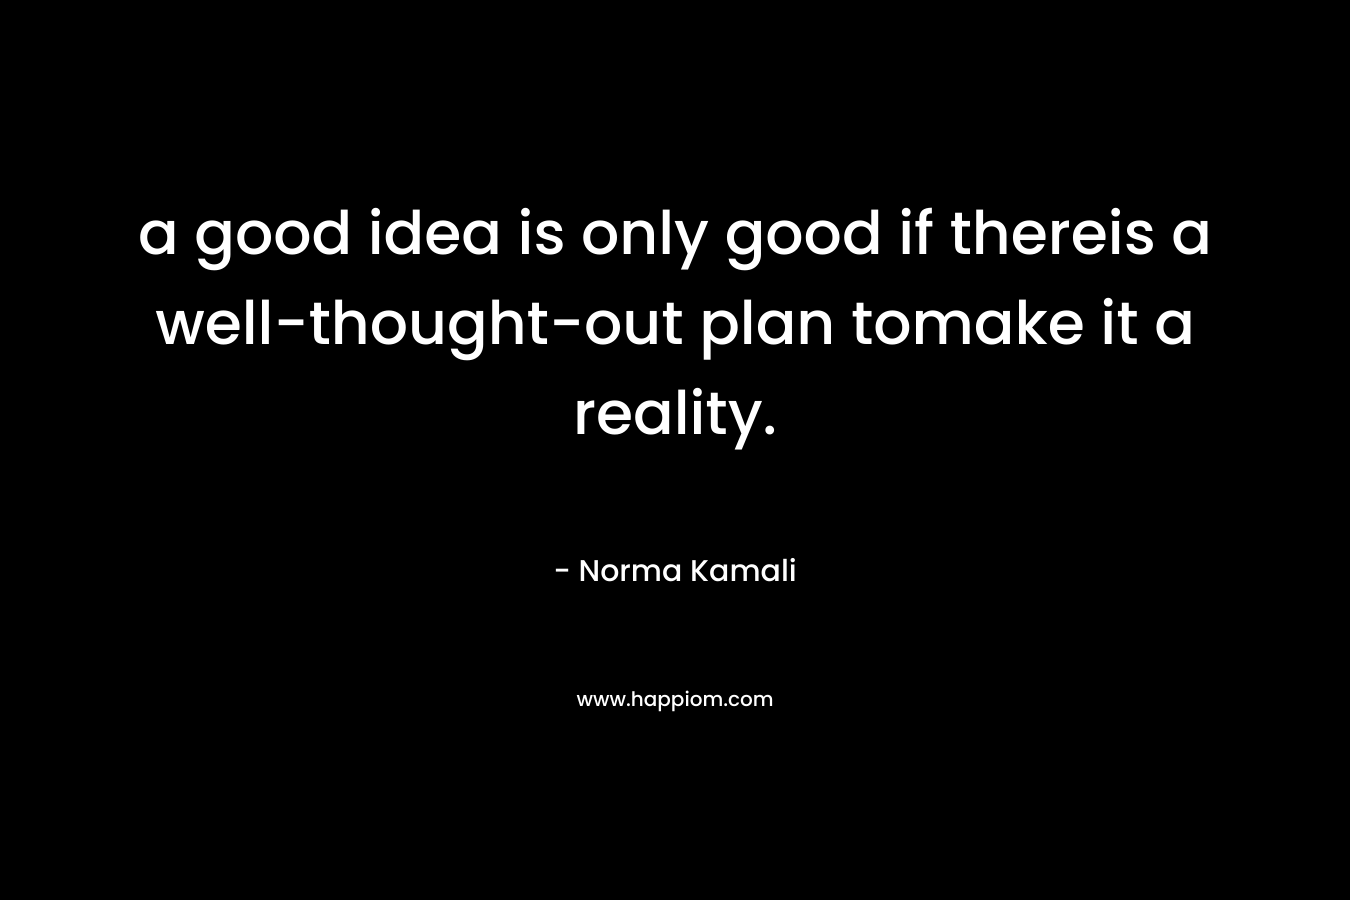 a good idea is only good if thereis a well-thought-out plan tomake it a reality.